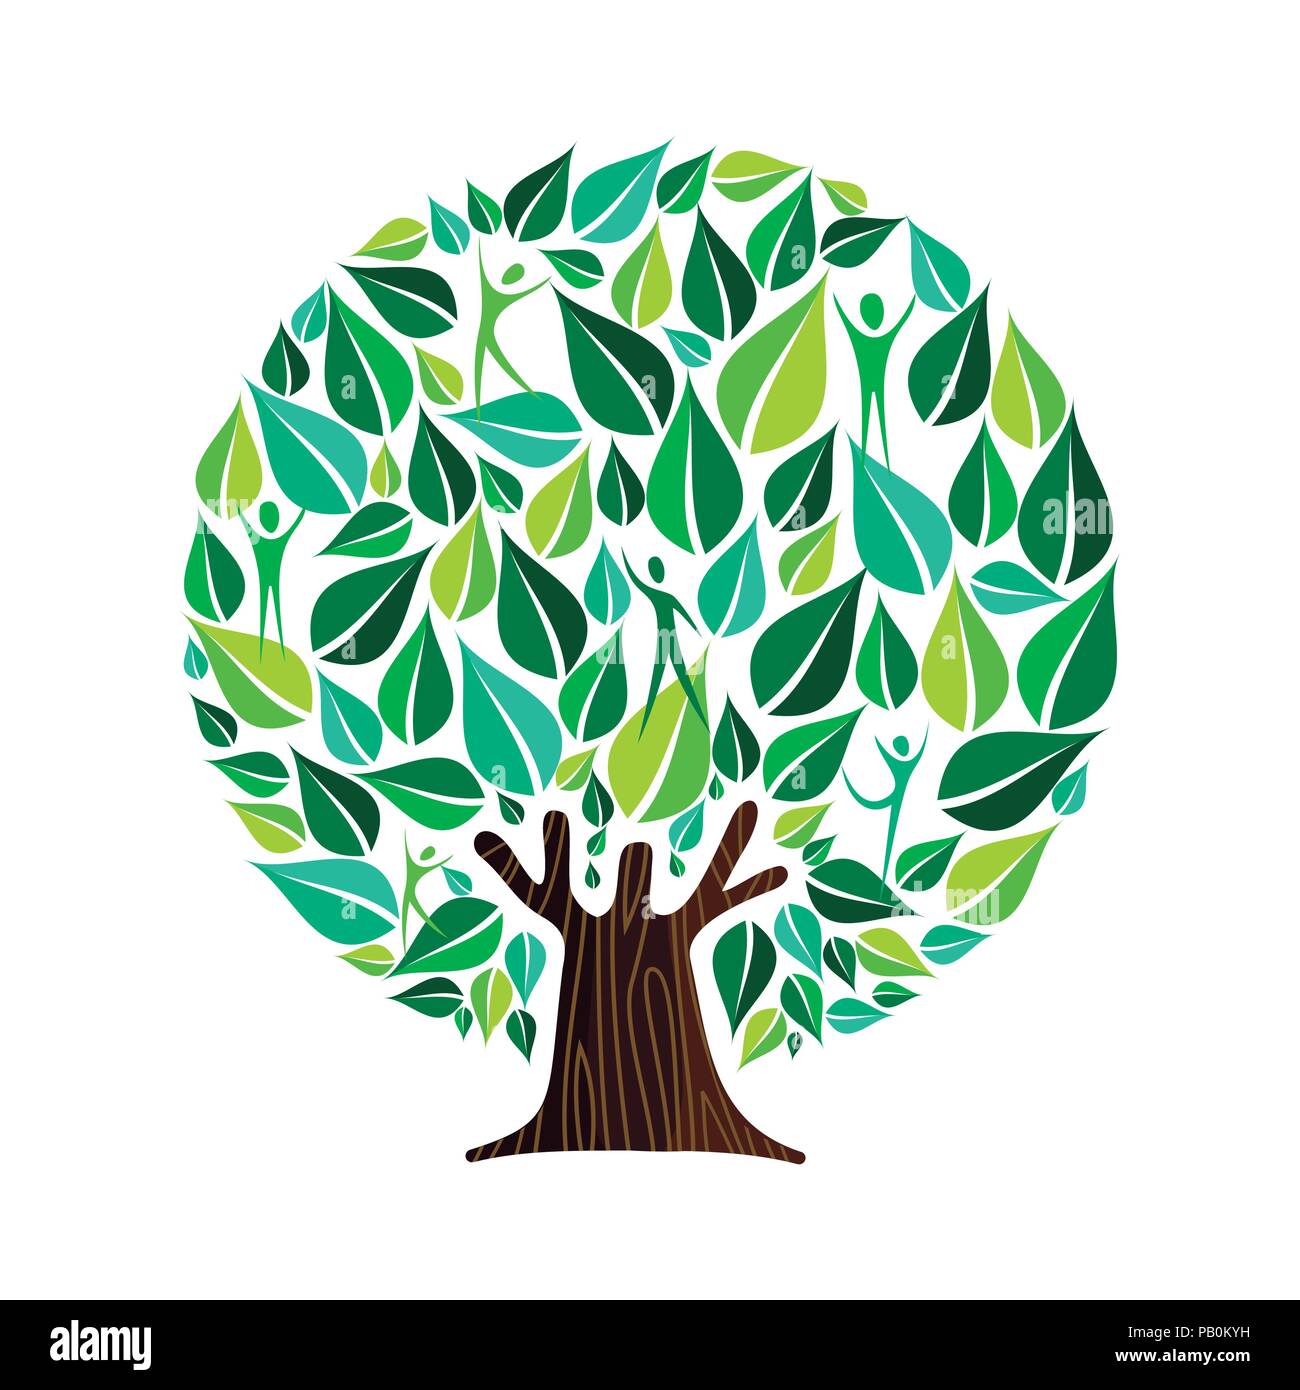 Tree made of green leaves with people inside. Nature concept, community help or social care campaign. EPS10 vector. Stock Vector